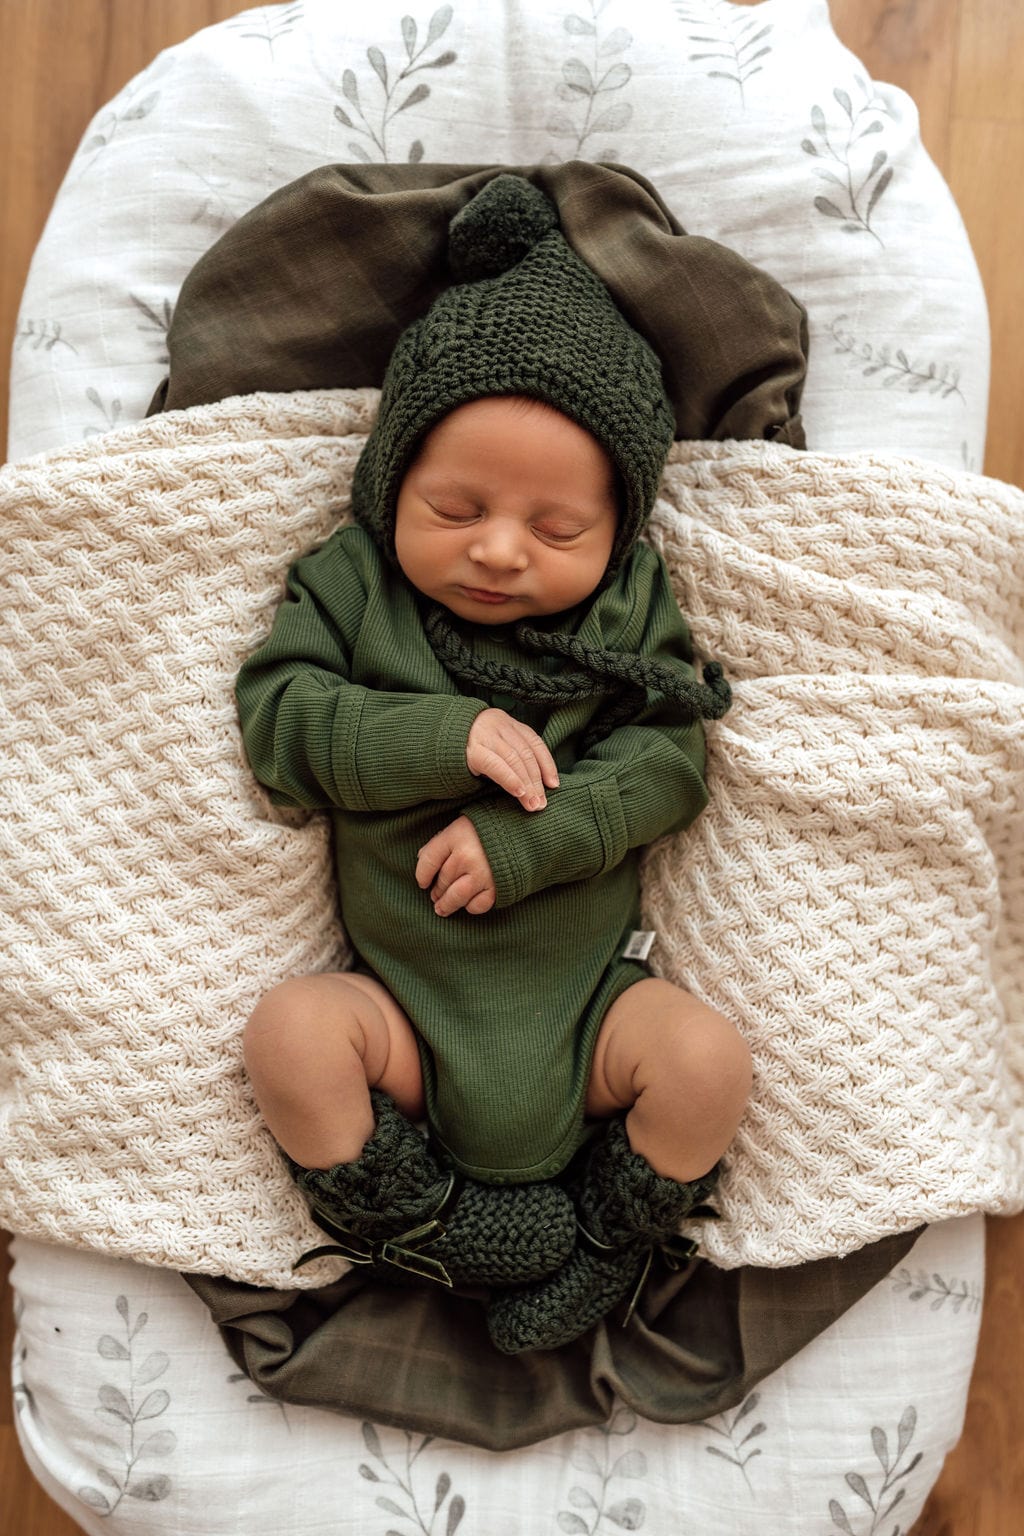 Snuggle Hunny Kids Baby Accessory Olive Merino Wool Bonnet & Booties